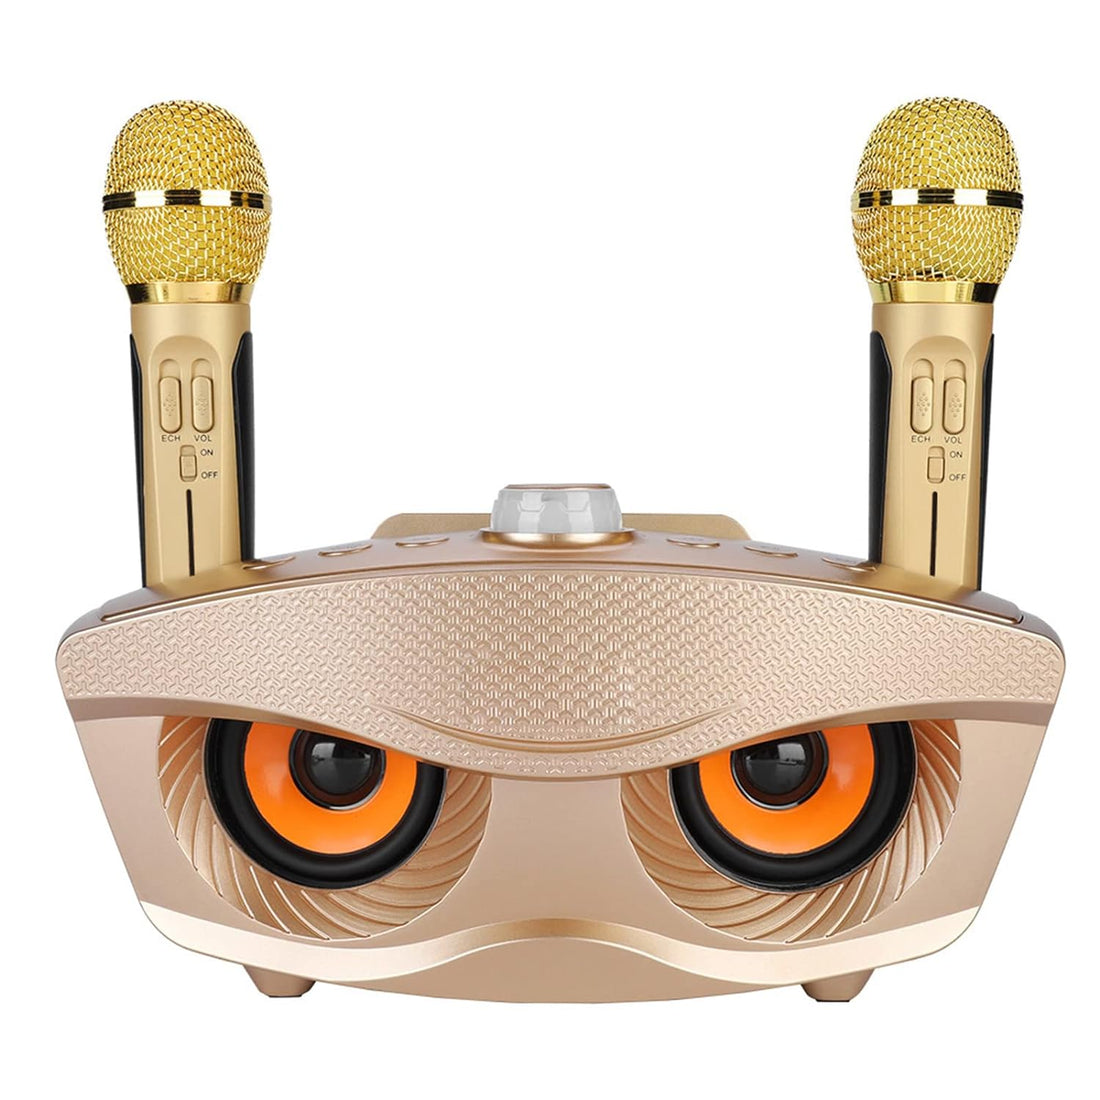 ciciglow Karaoke Speaker, Home KTV Karaoke Unit with Two Microphones Speaker Compatible with Memory Card and USB Flash Drive (Gold)